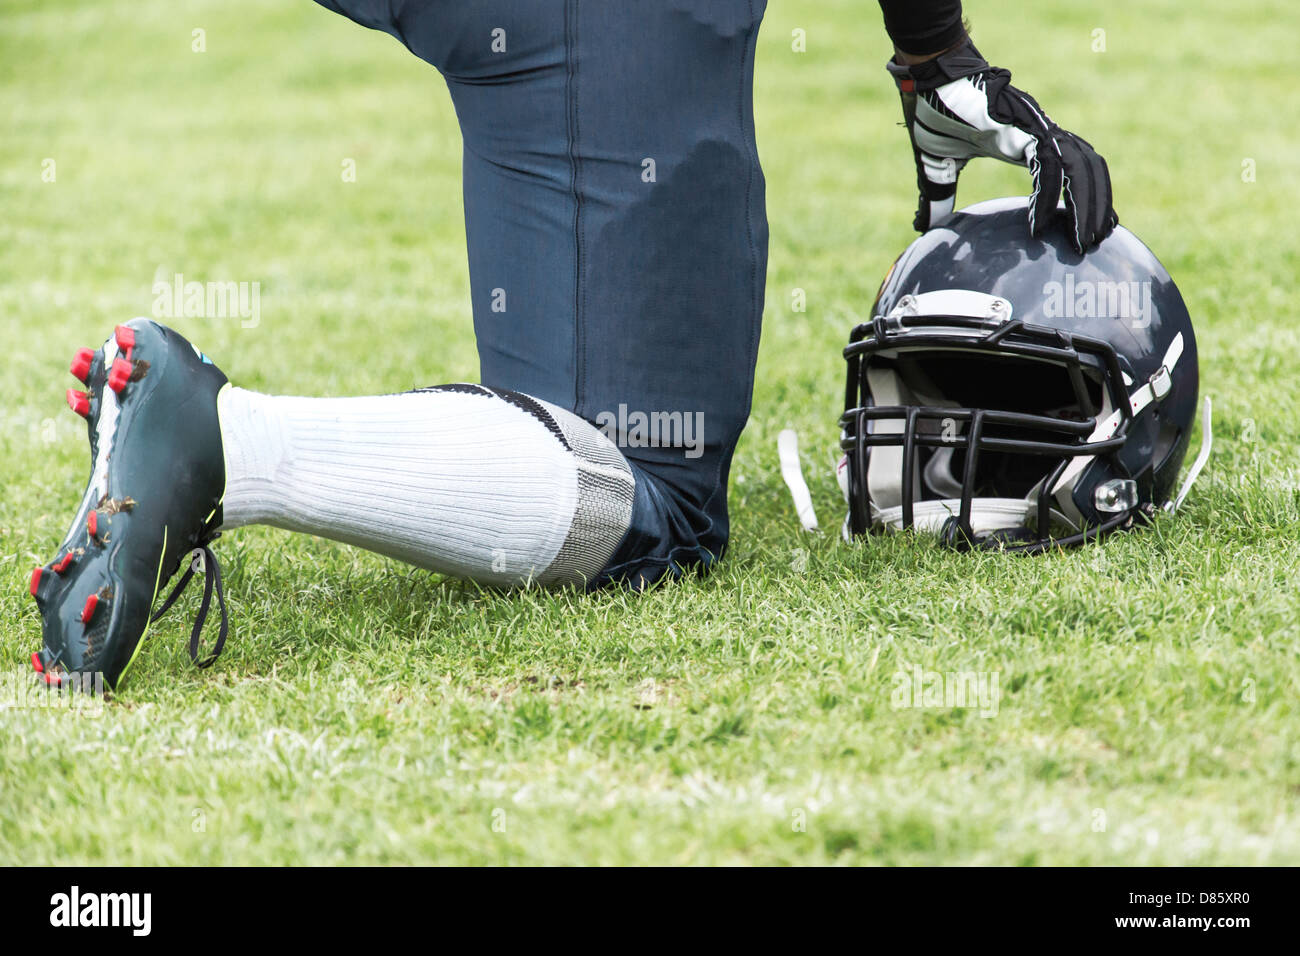 American football player kneels on the playground Stock Photo